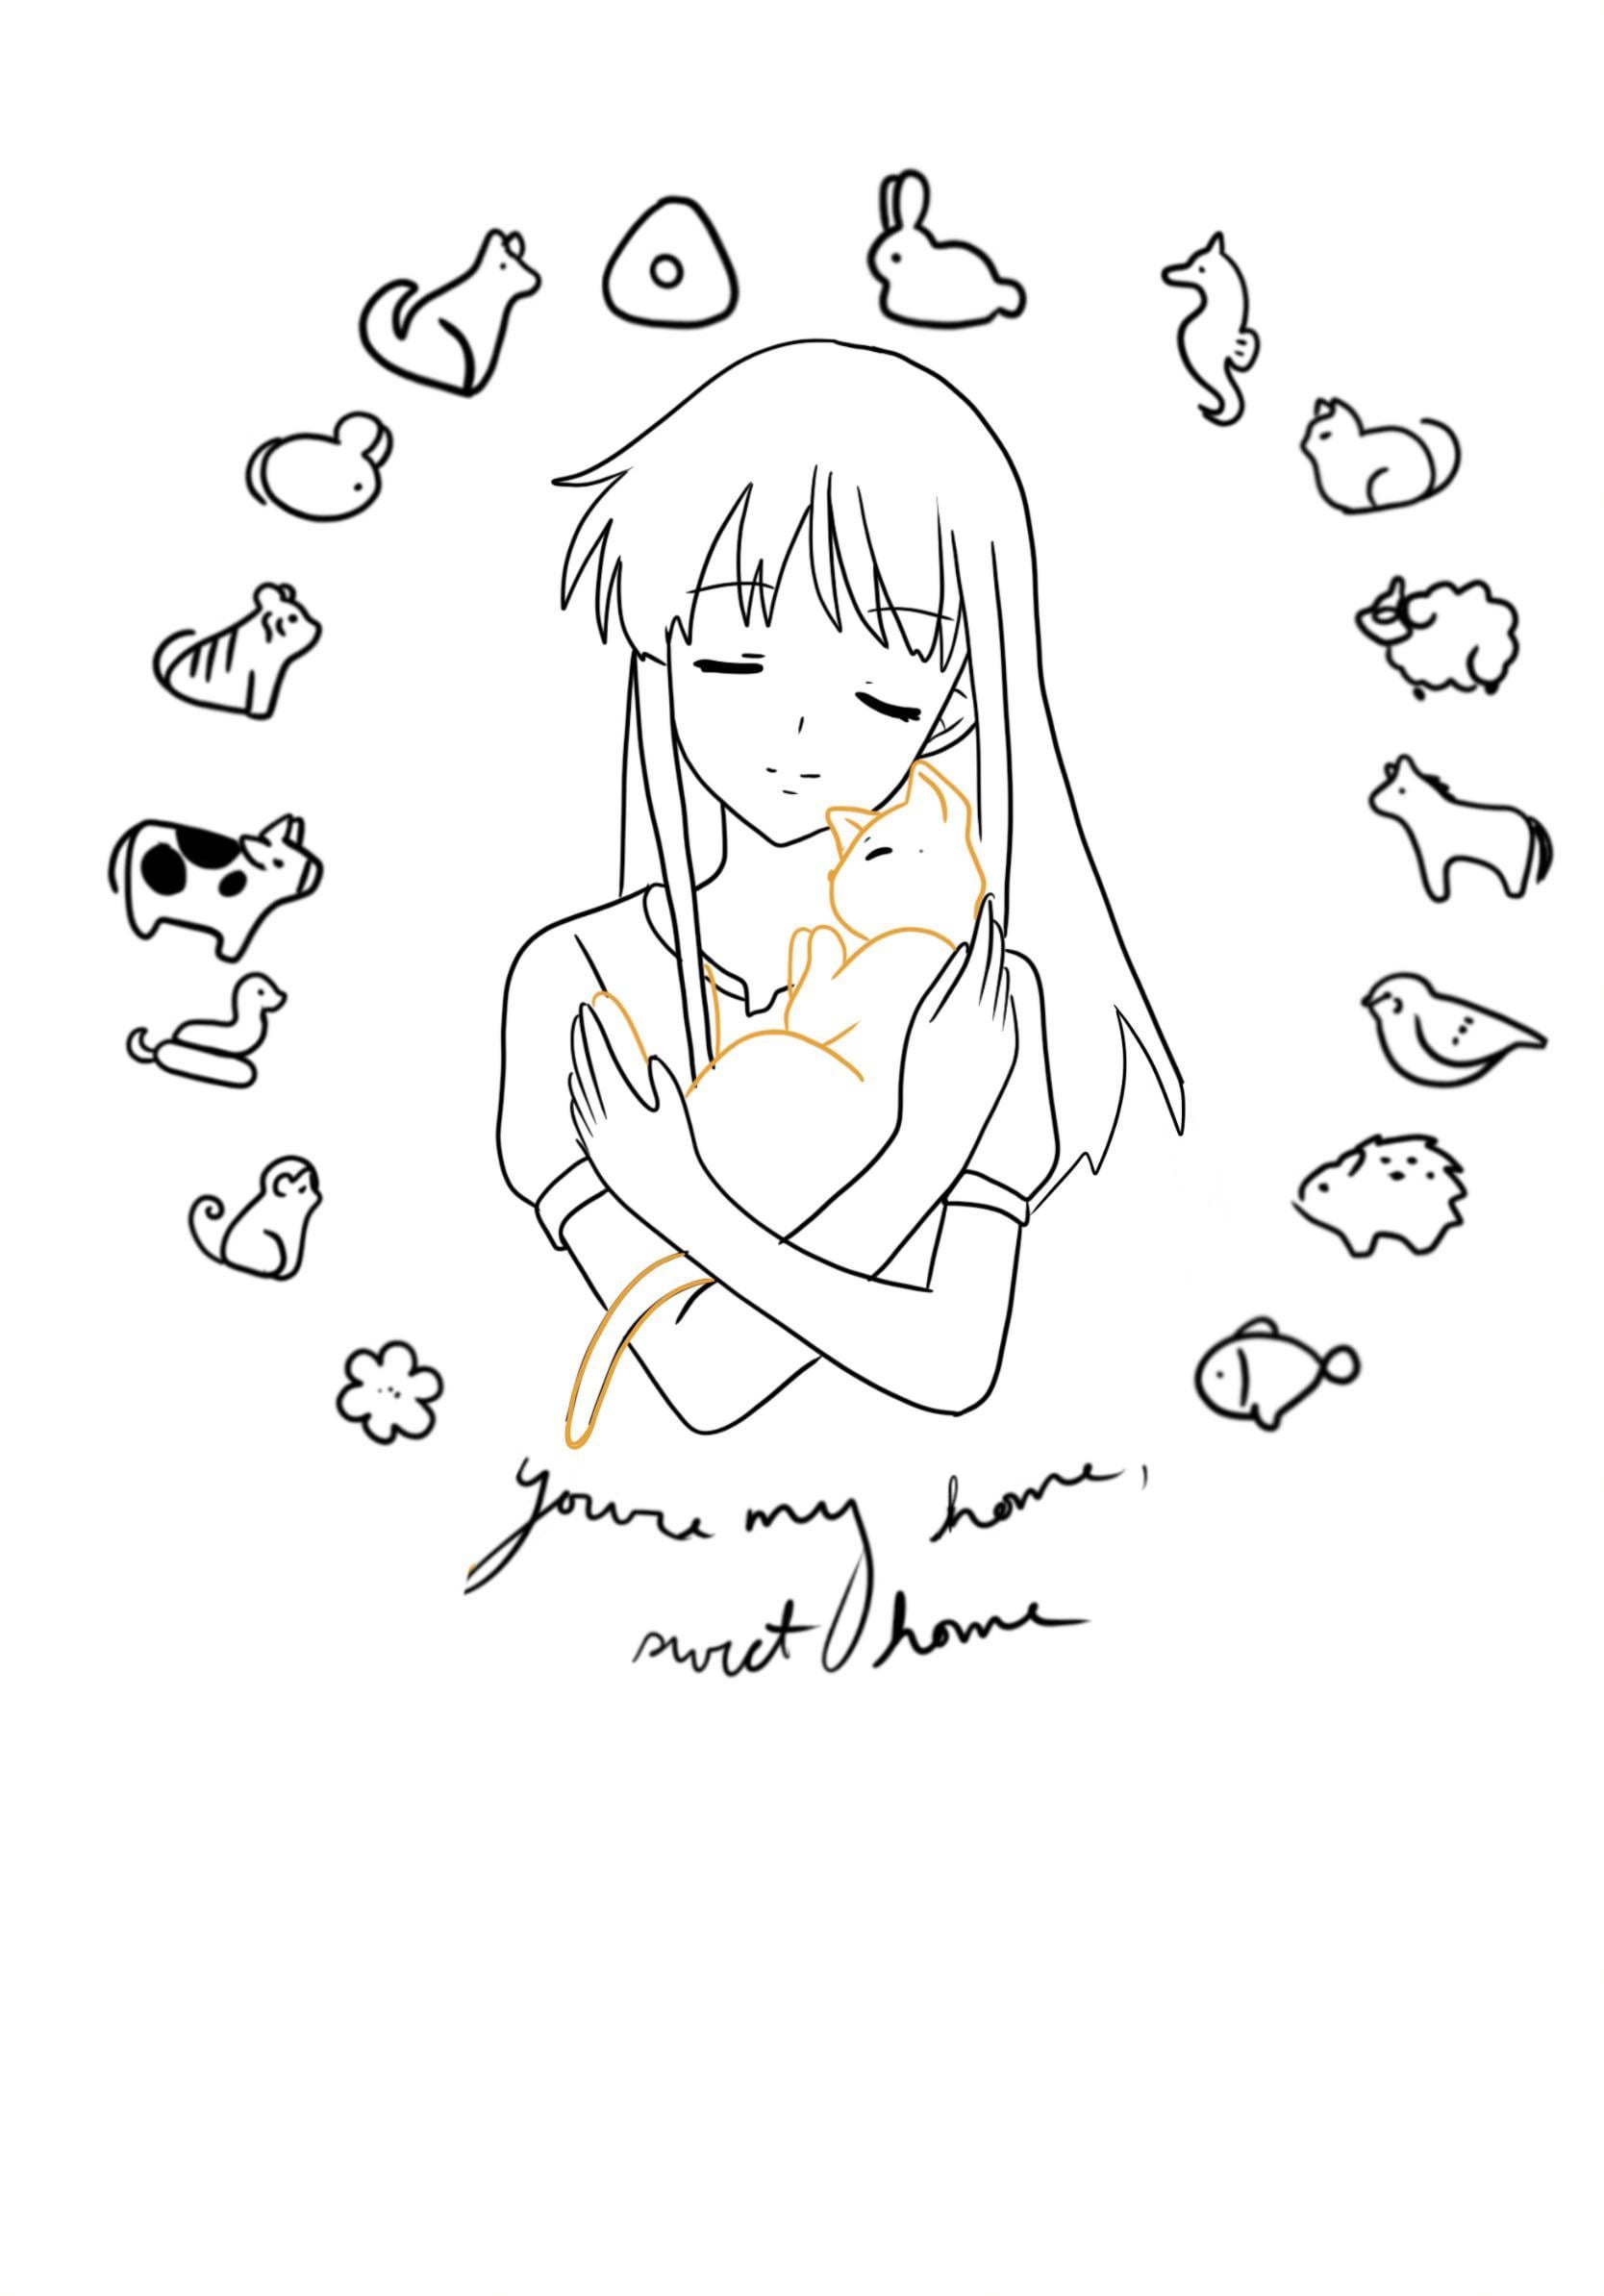 Tattoo pt thank yall for your feedback i added her head this time still just a concept though rfruitsbasket